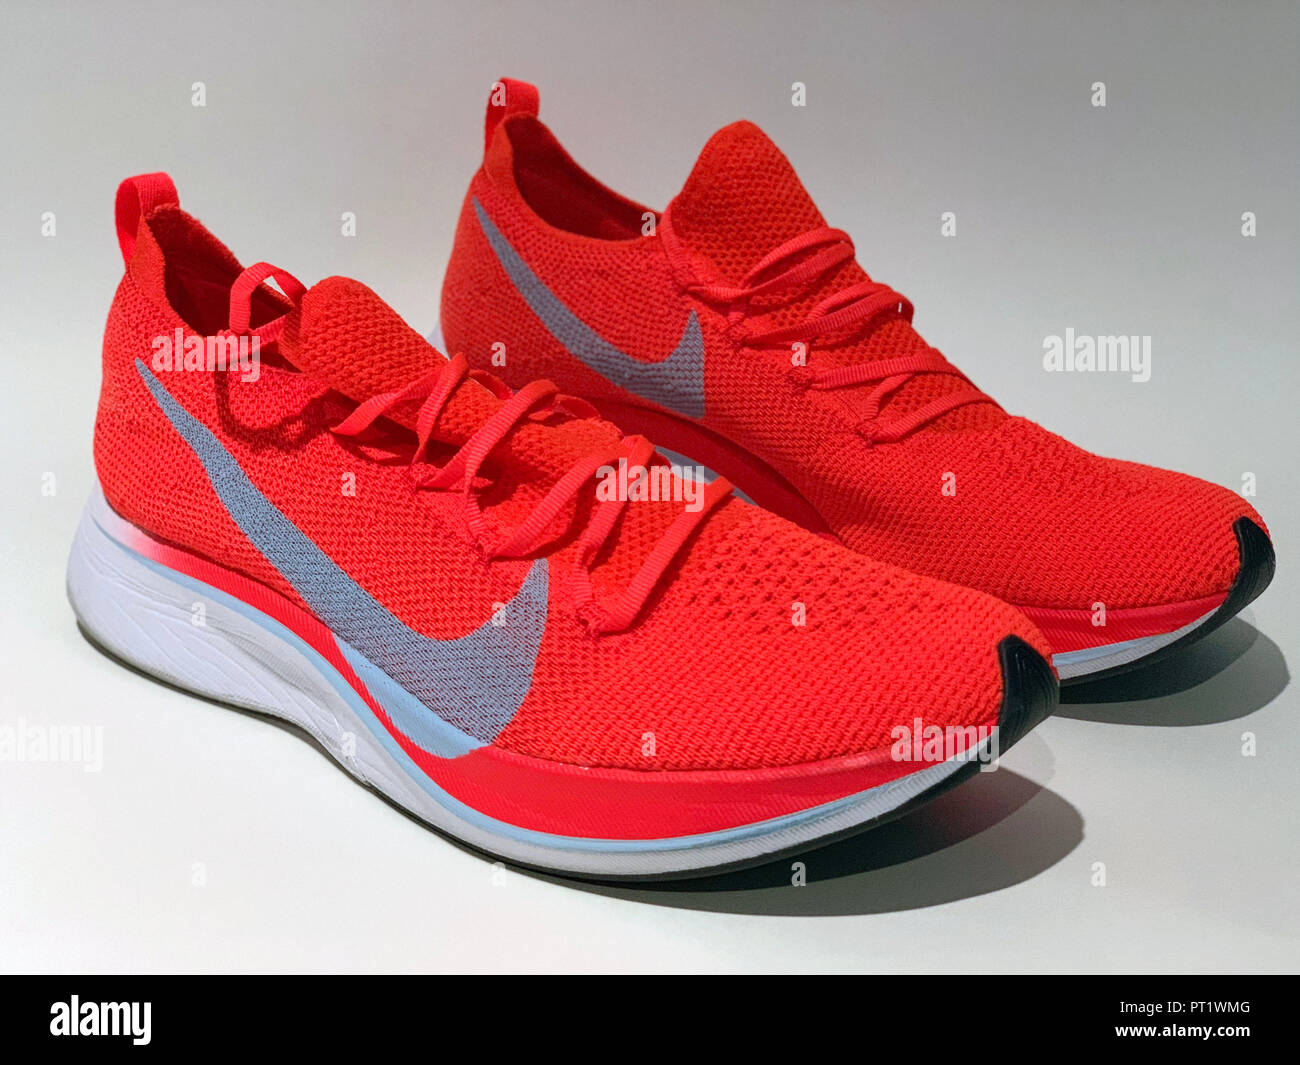 Edad adulta Asesinar Satisfacer Los Angeles, United States. 05th Oct, 2018. Detailed view of the Nike  VaporFly 4% Flyknit running shoe released on Thursday, Oct.4, 2018. The  racing flat features an ultra-light, uber-responsive ZoomX foam and